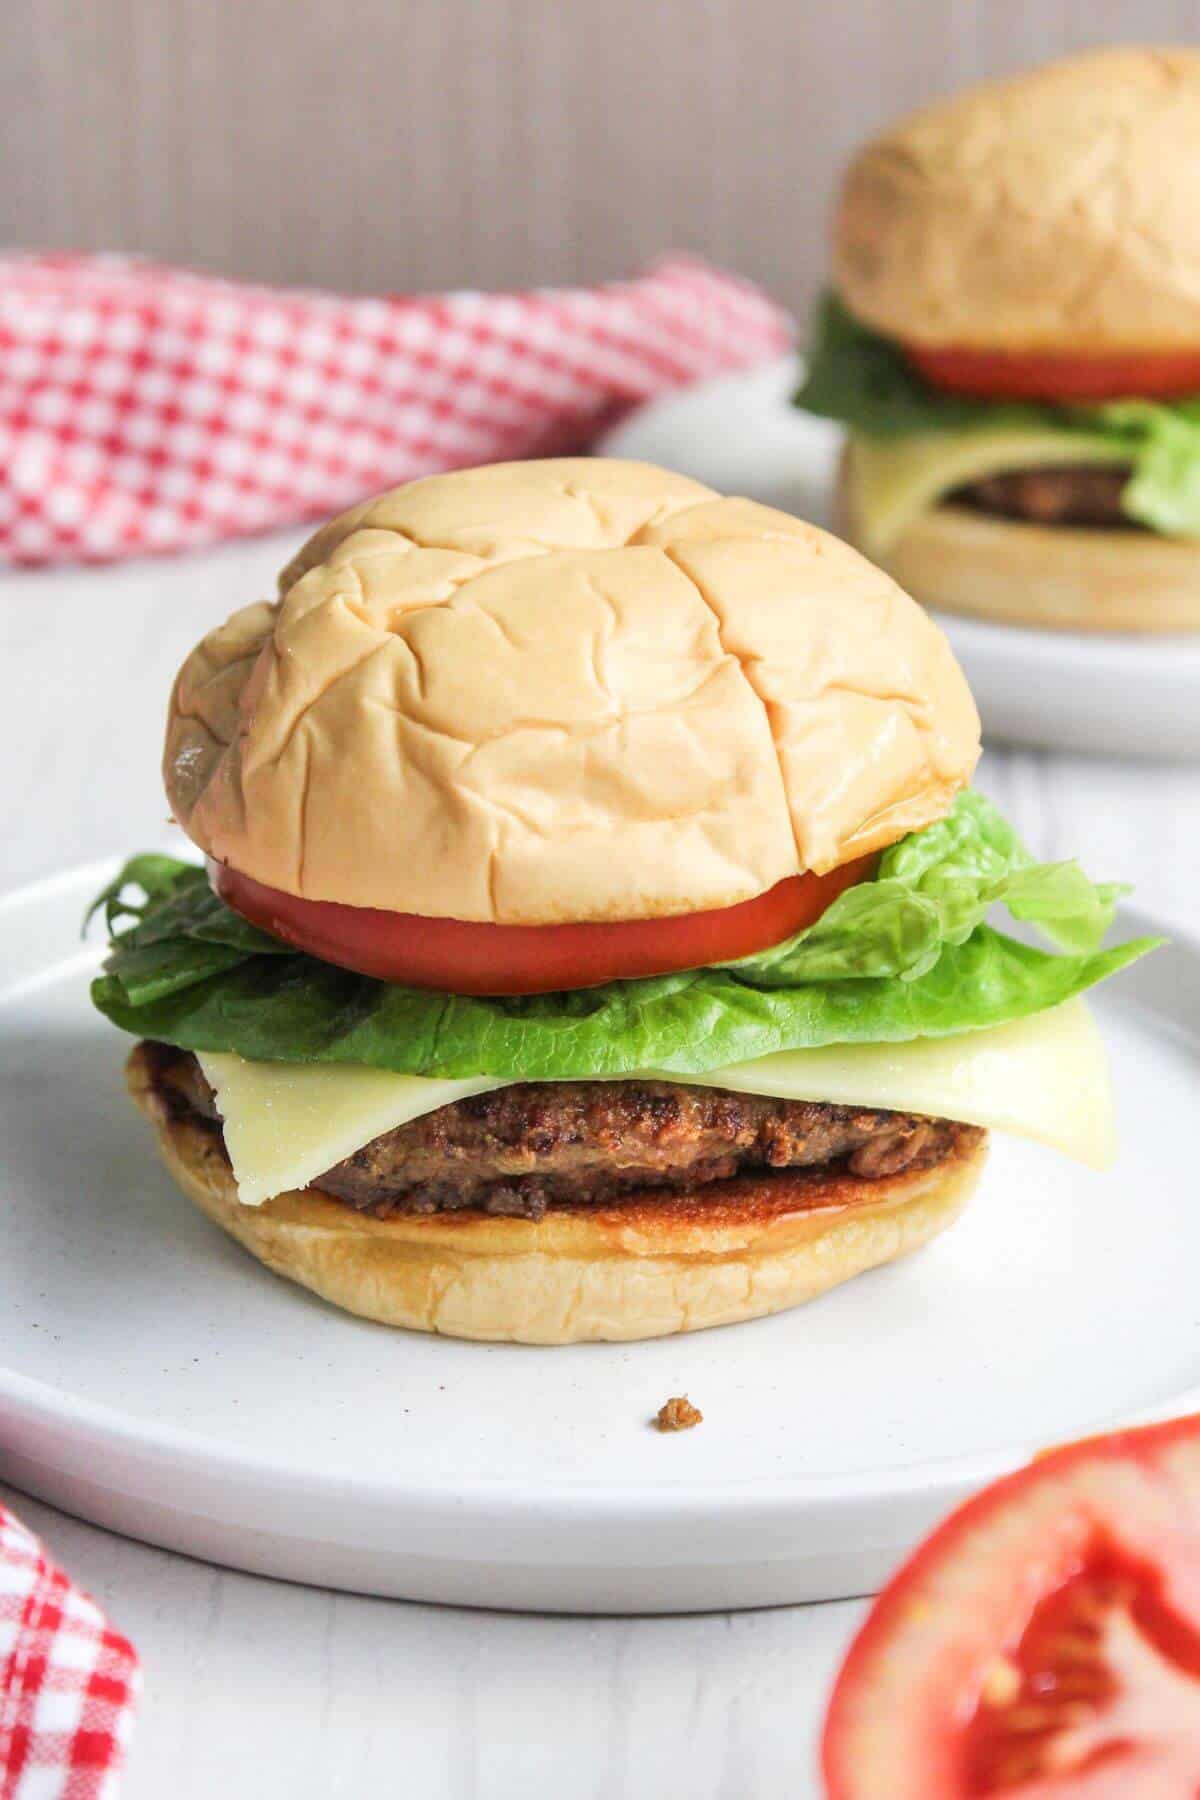 Two pork burgers on a plate with tomatoes and lettuce.